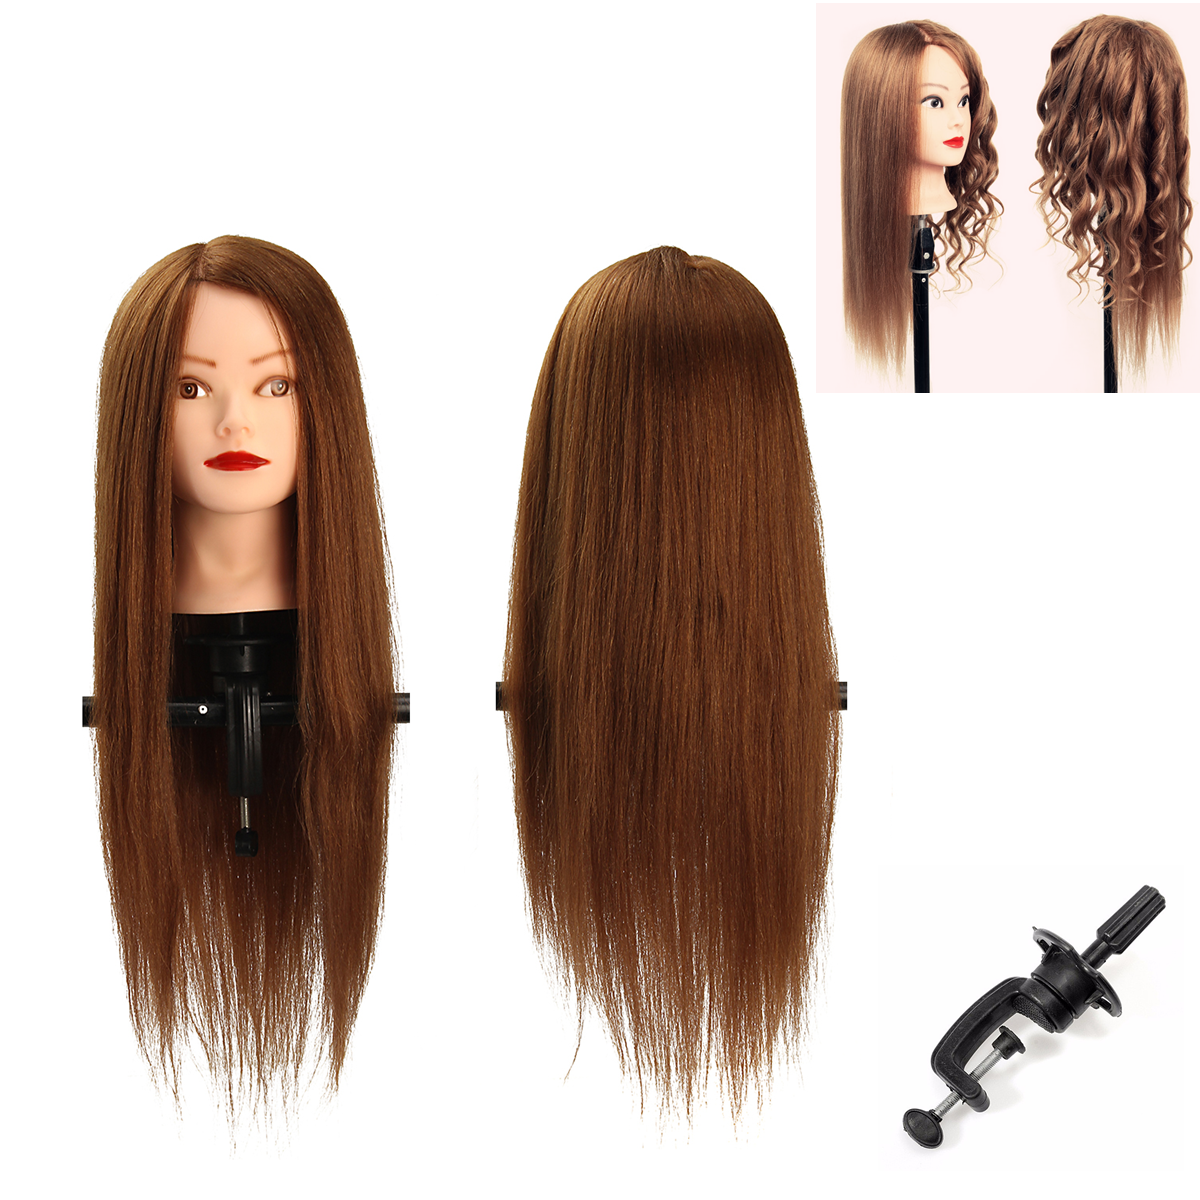 

24'' 100% Human Hair Practice Mannequin Head Hairdressing T